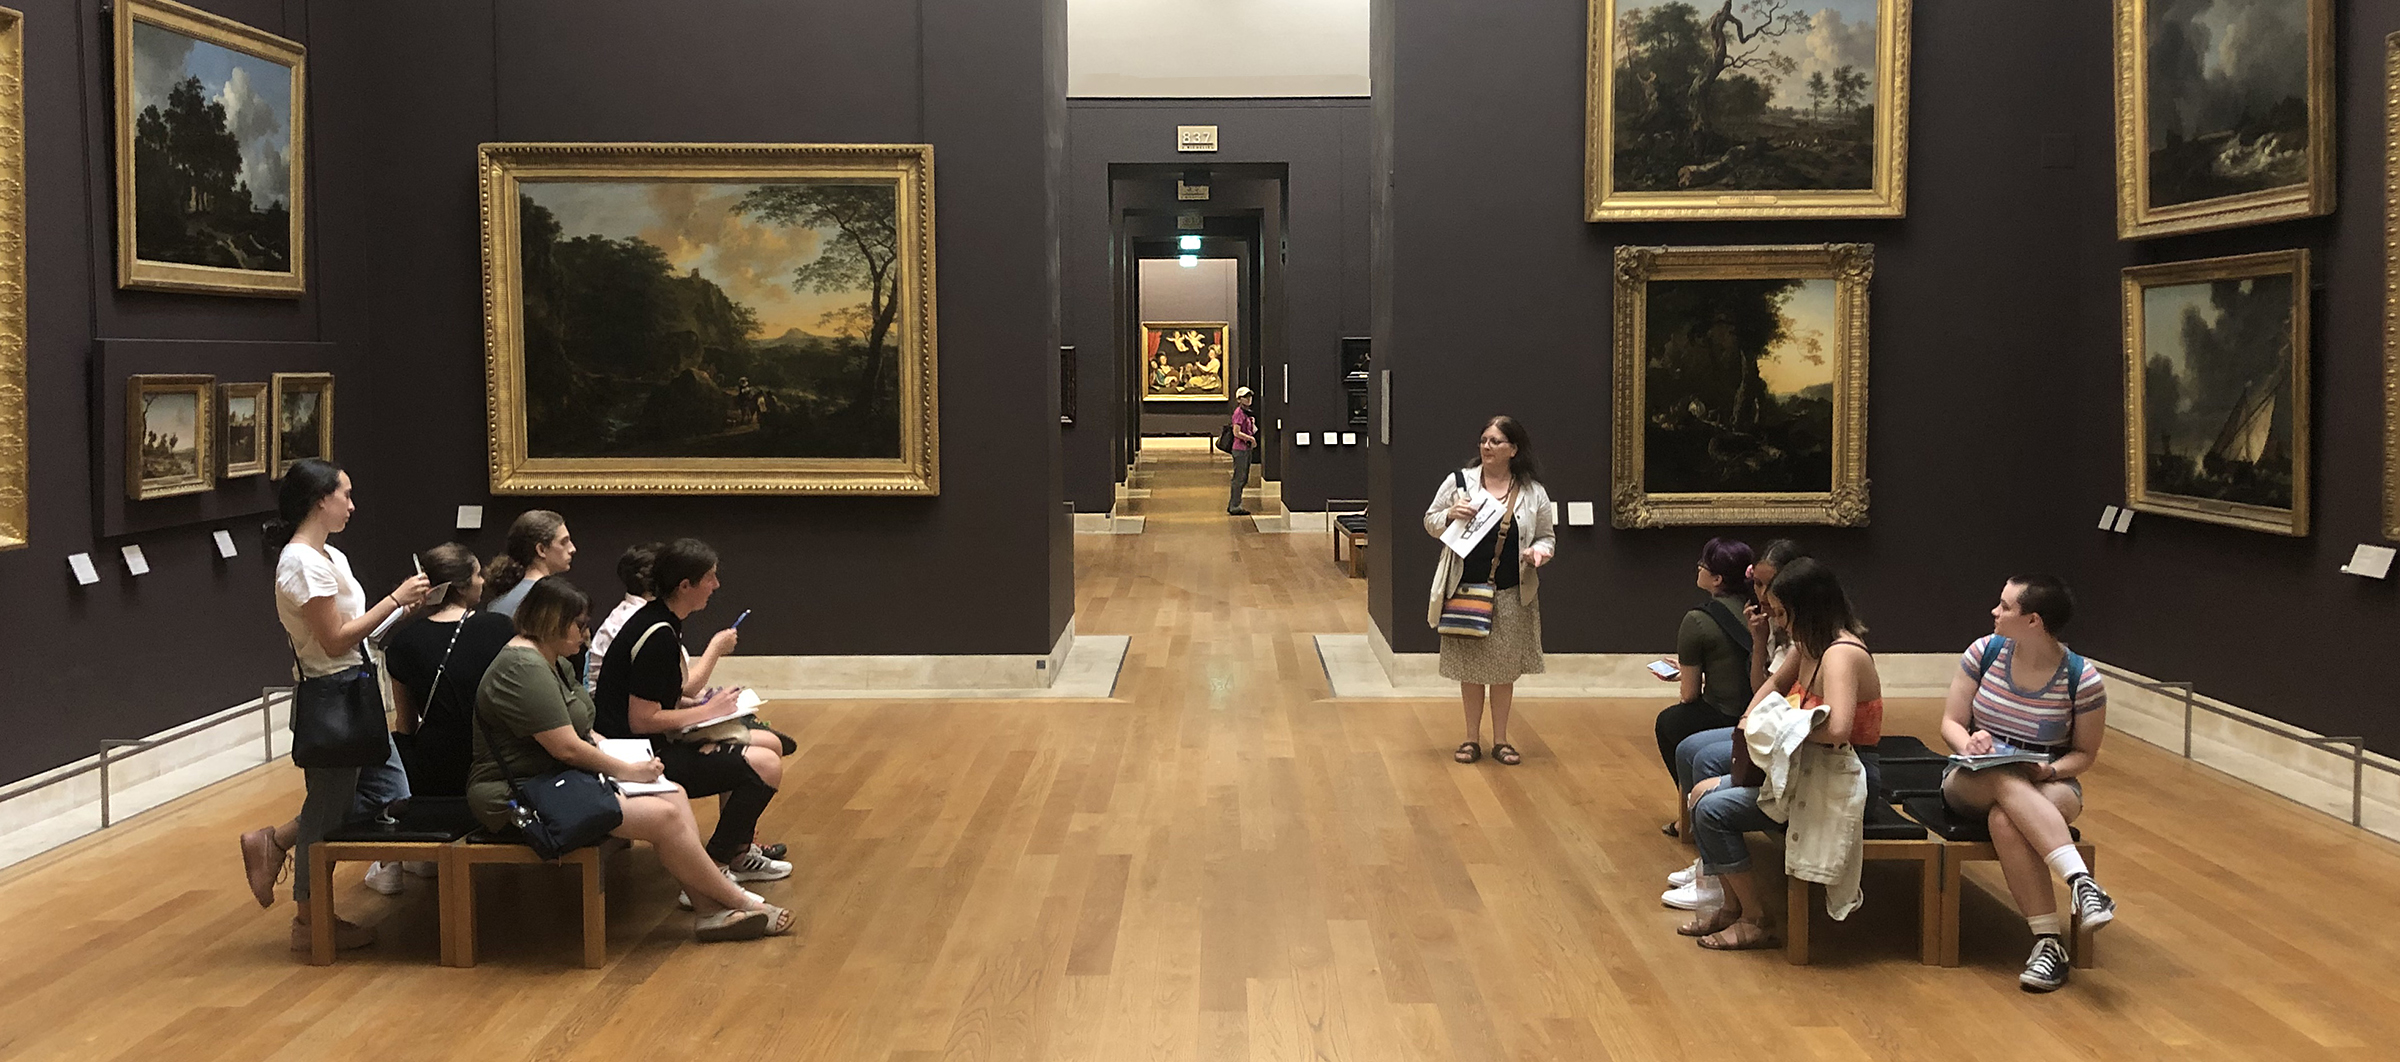 Students study landscape painting at the Louvre in Paris